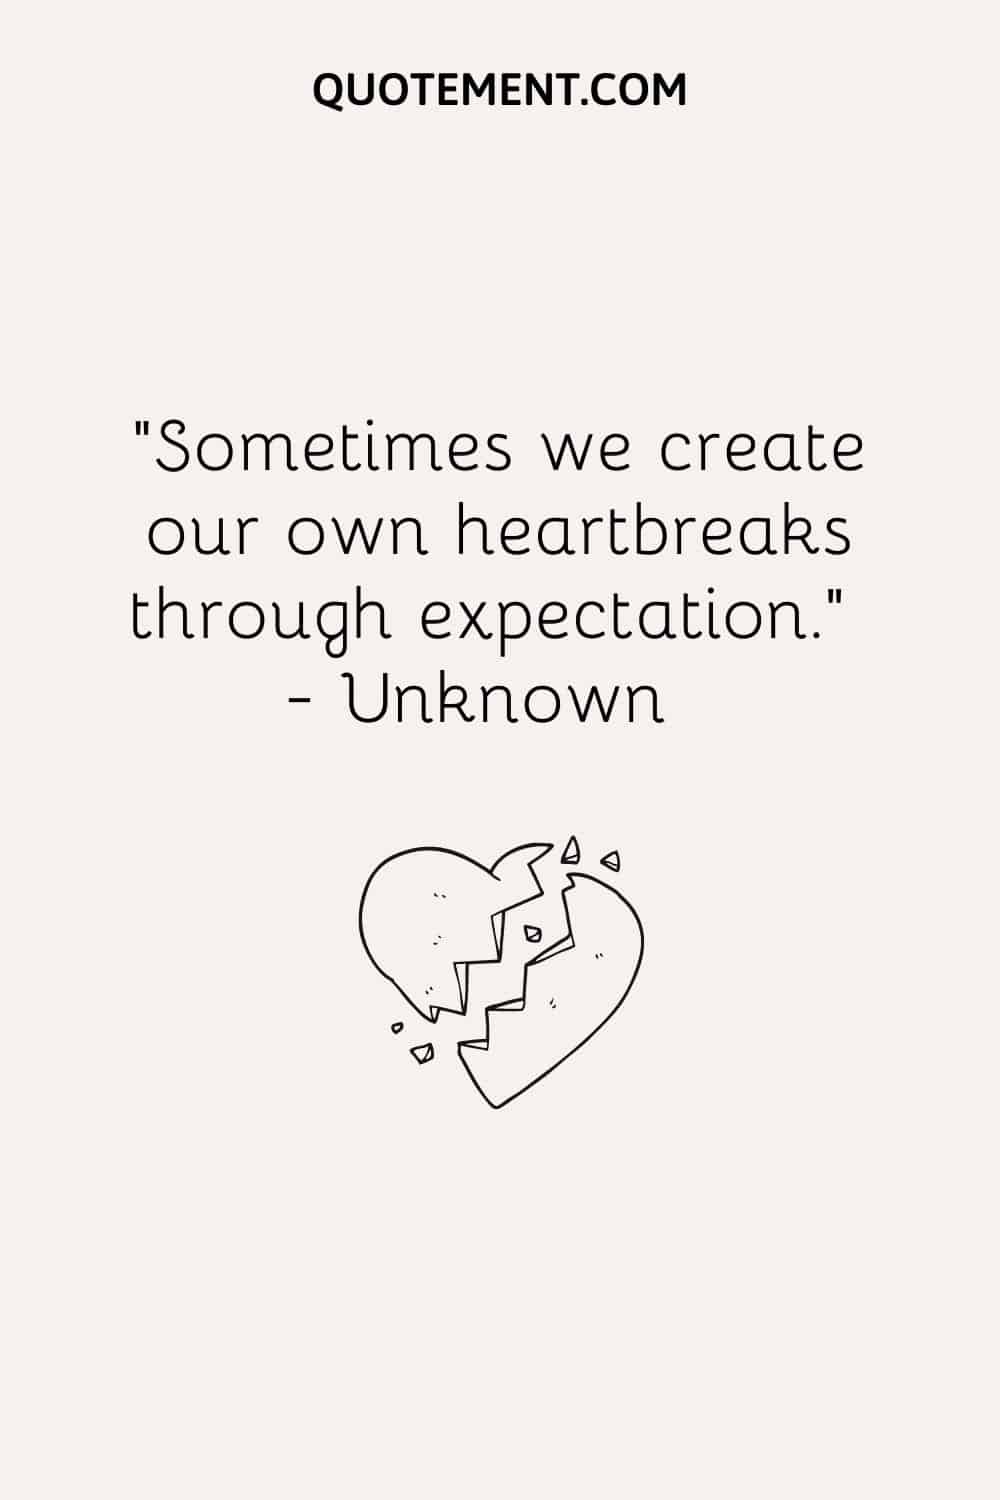 Sometimes we create our own heartbreaks through expectation